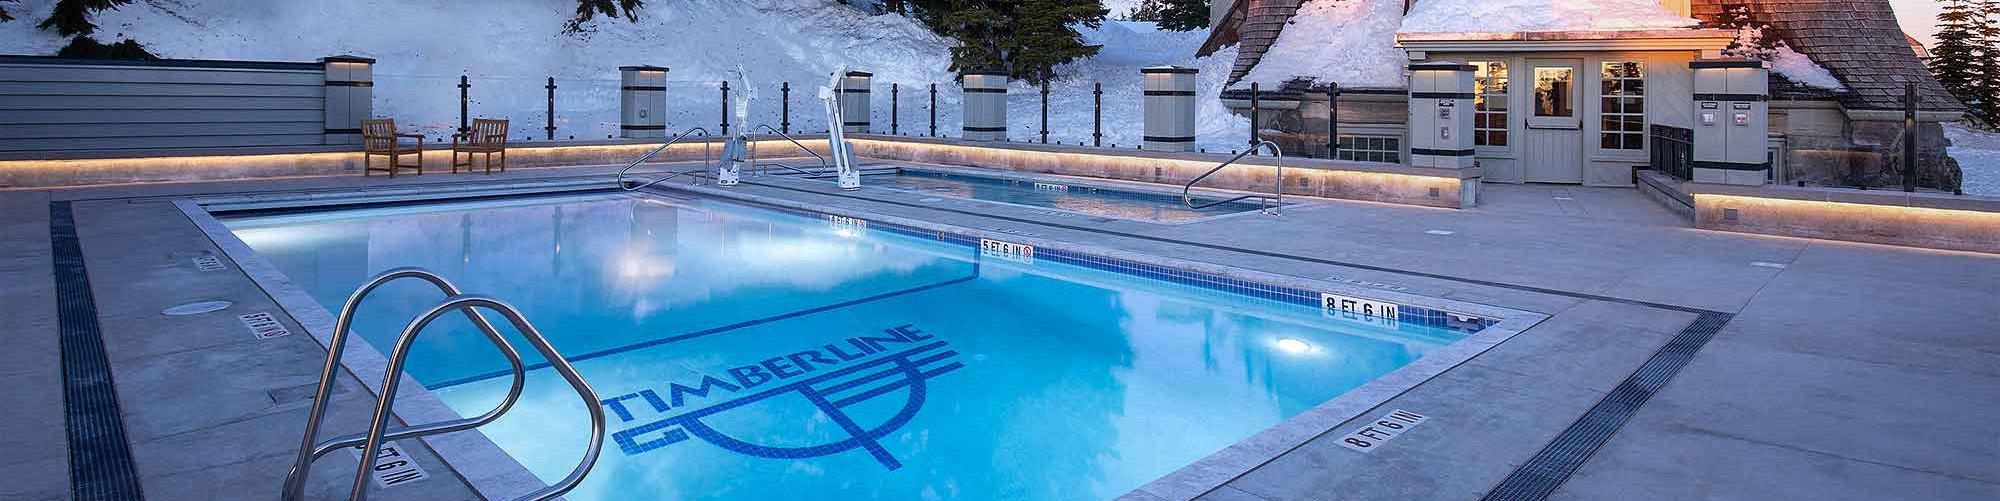 THE NEW OUTDOOR HEATED SWIMMING POOS AND HOT TUB AT TIMBERLINE